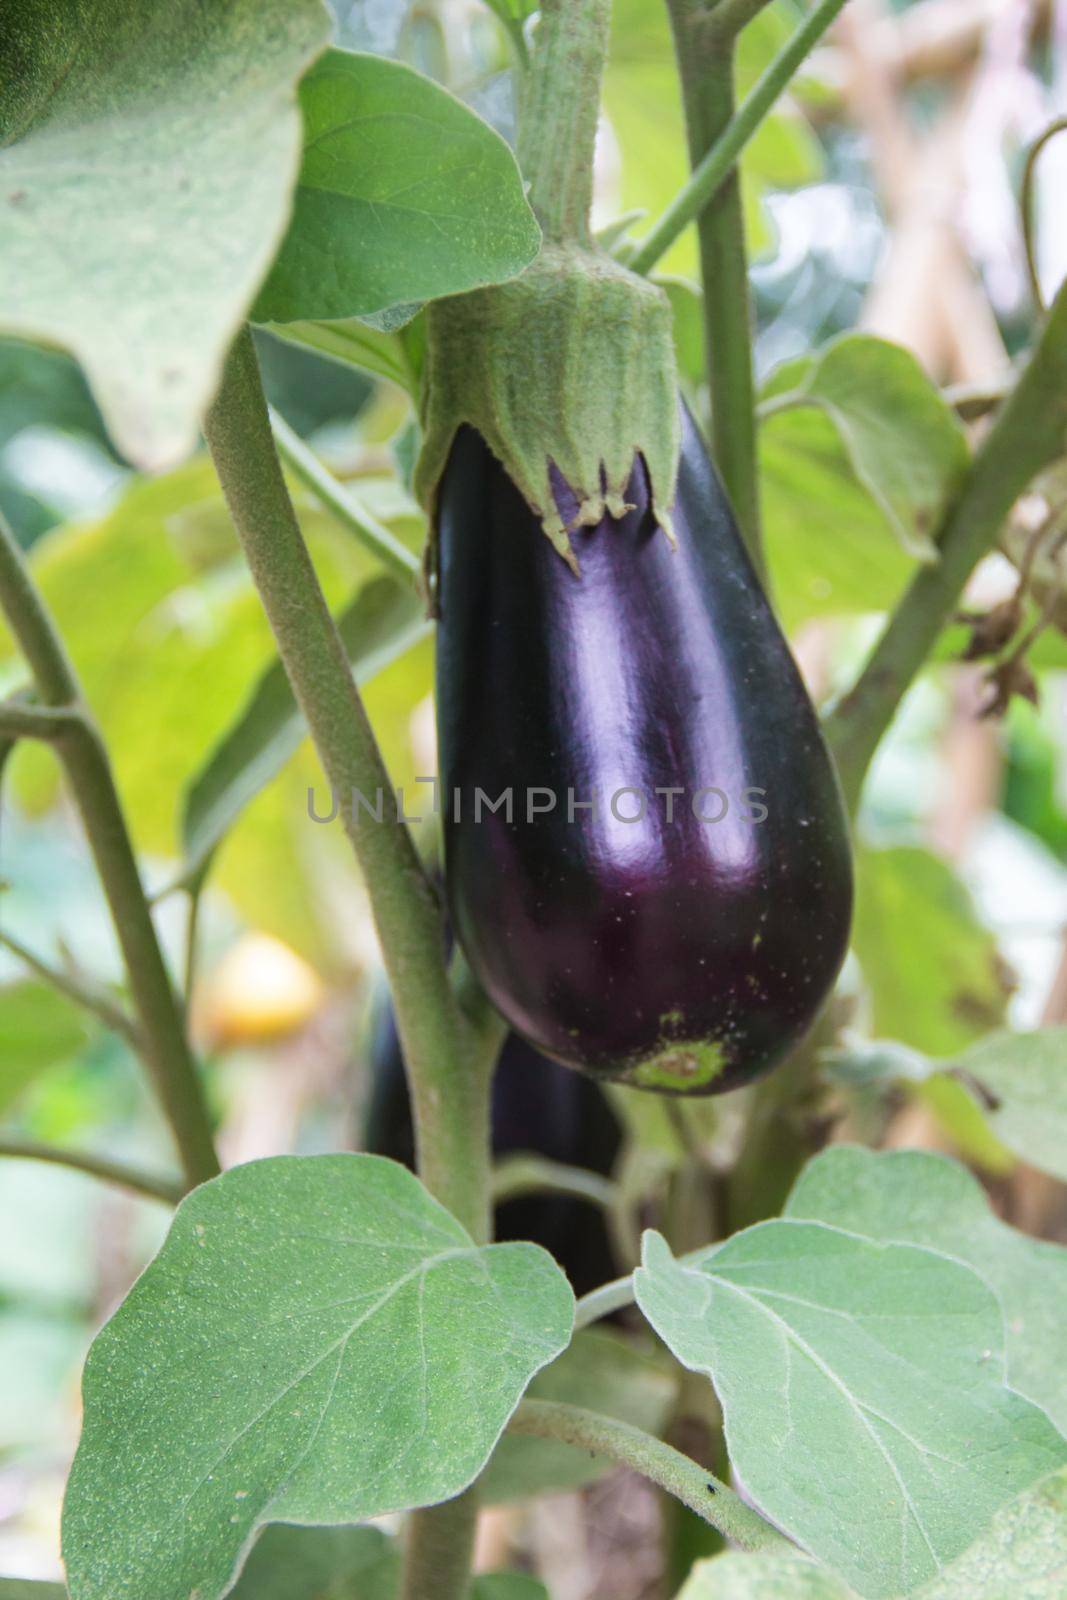 flowers and fruits of violet aubergines in the organic garden plant by GabrielaBertolini